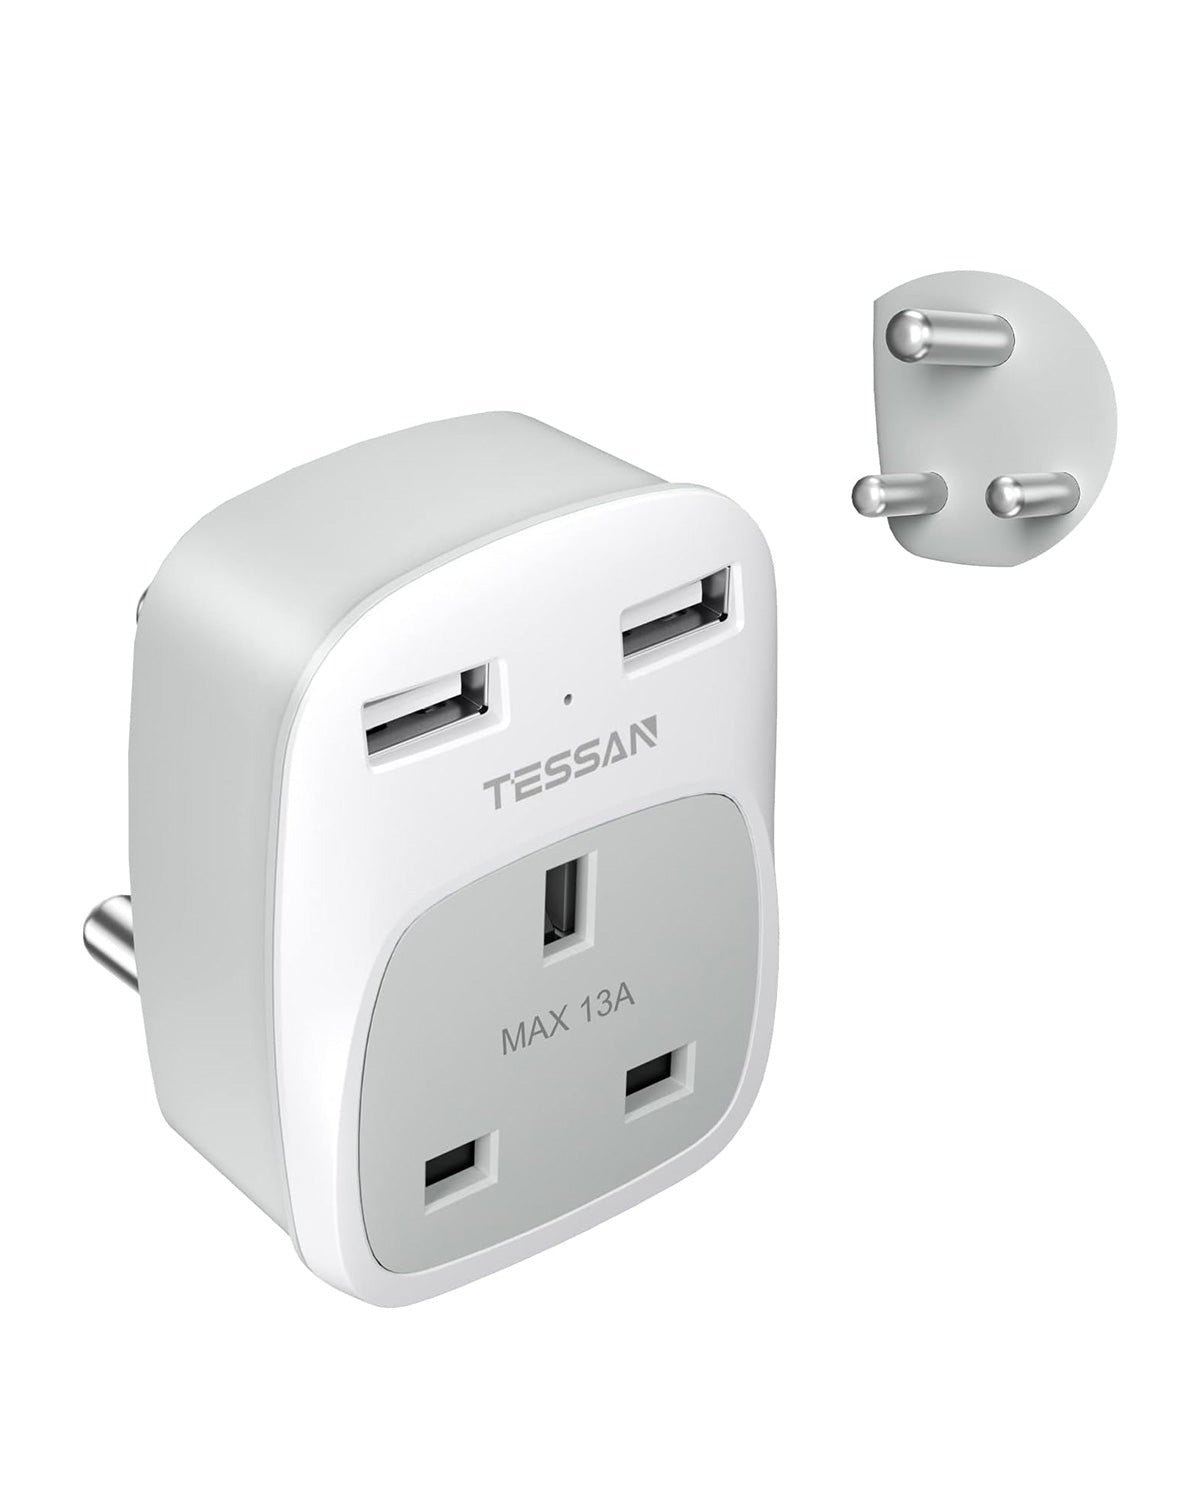 UK to South Africa Plug Adapter with 2 USB